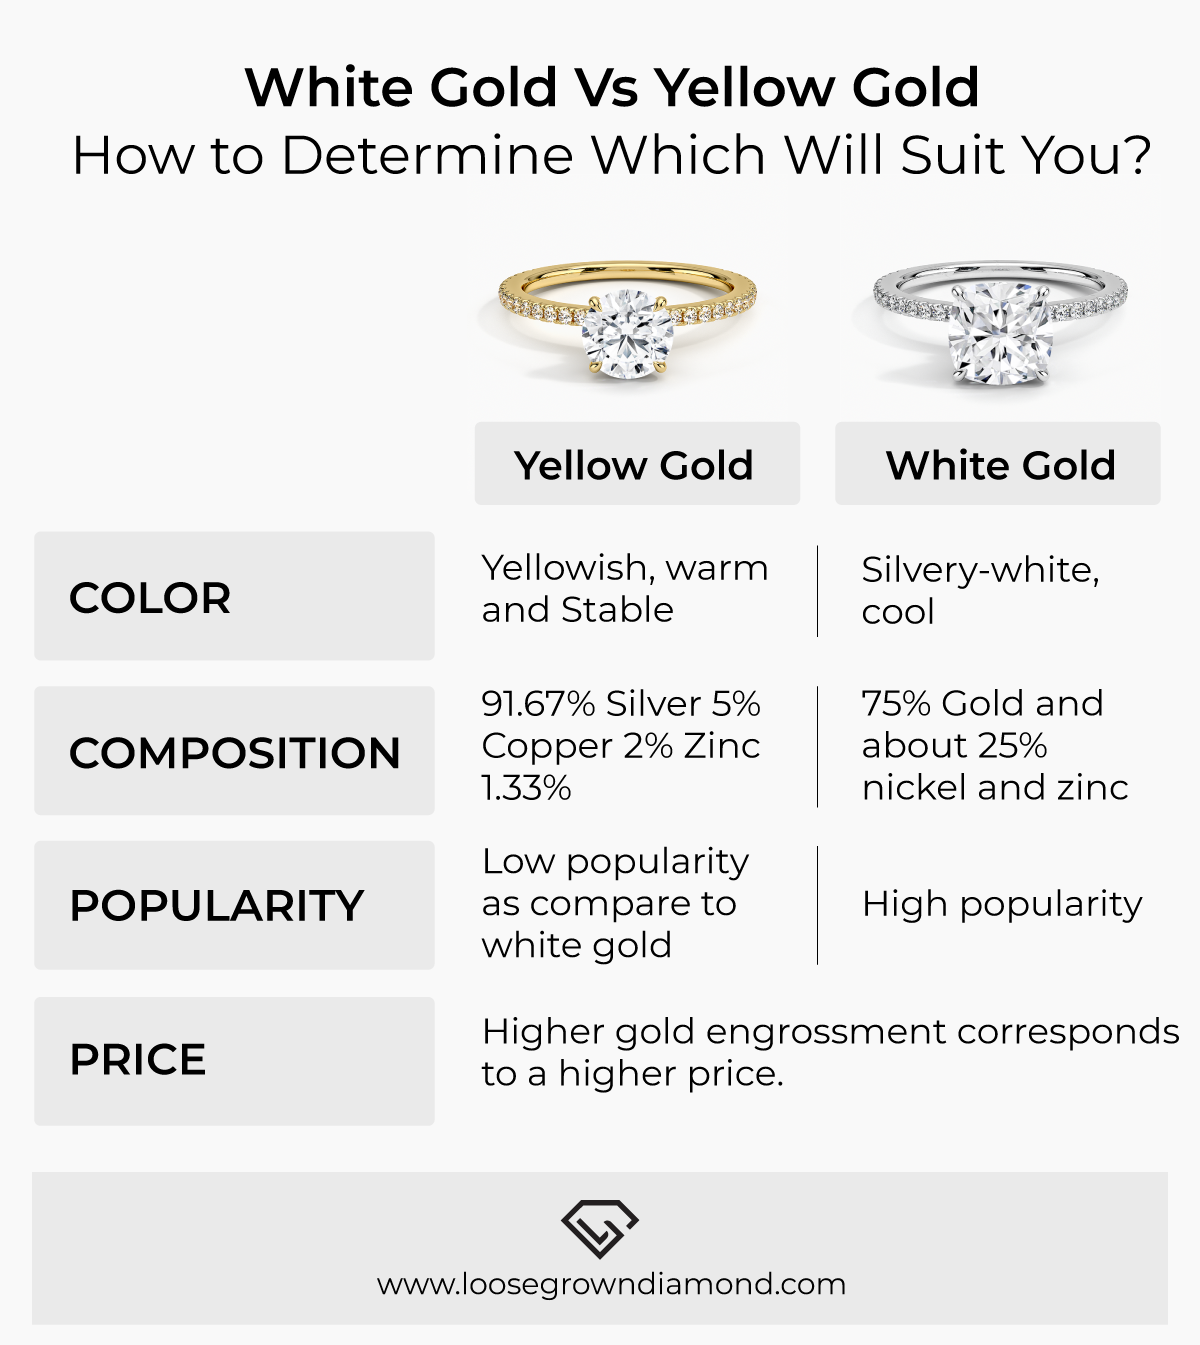 white gold vs yellow gold- difference Price, popularity, composition and color